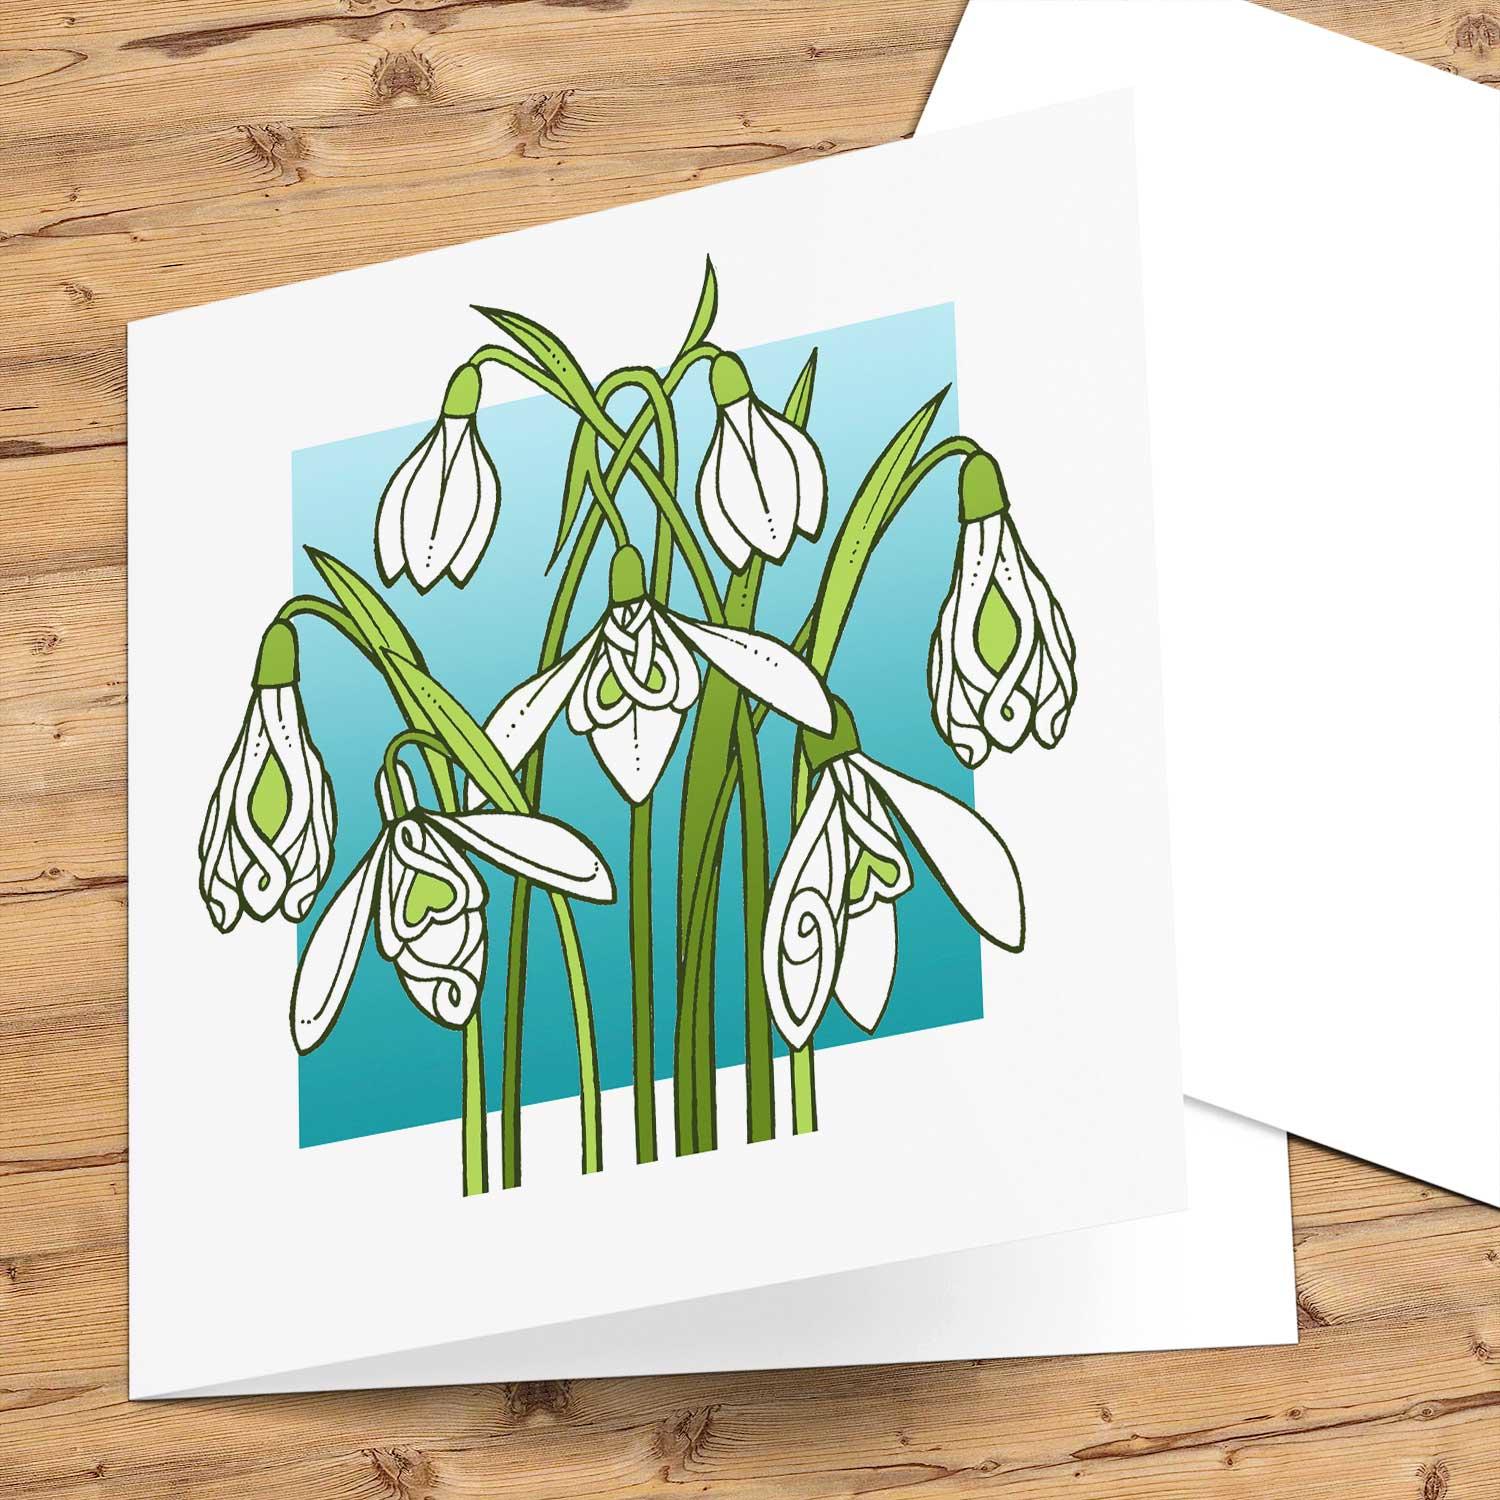 Snowdrops Greeting Card from an original painting by artist Marjory Tait